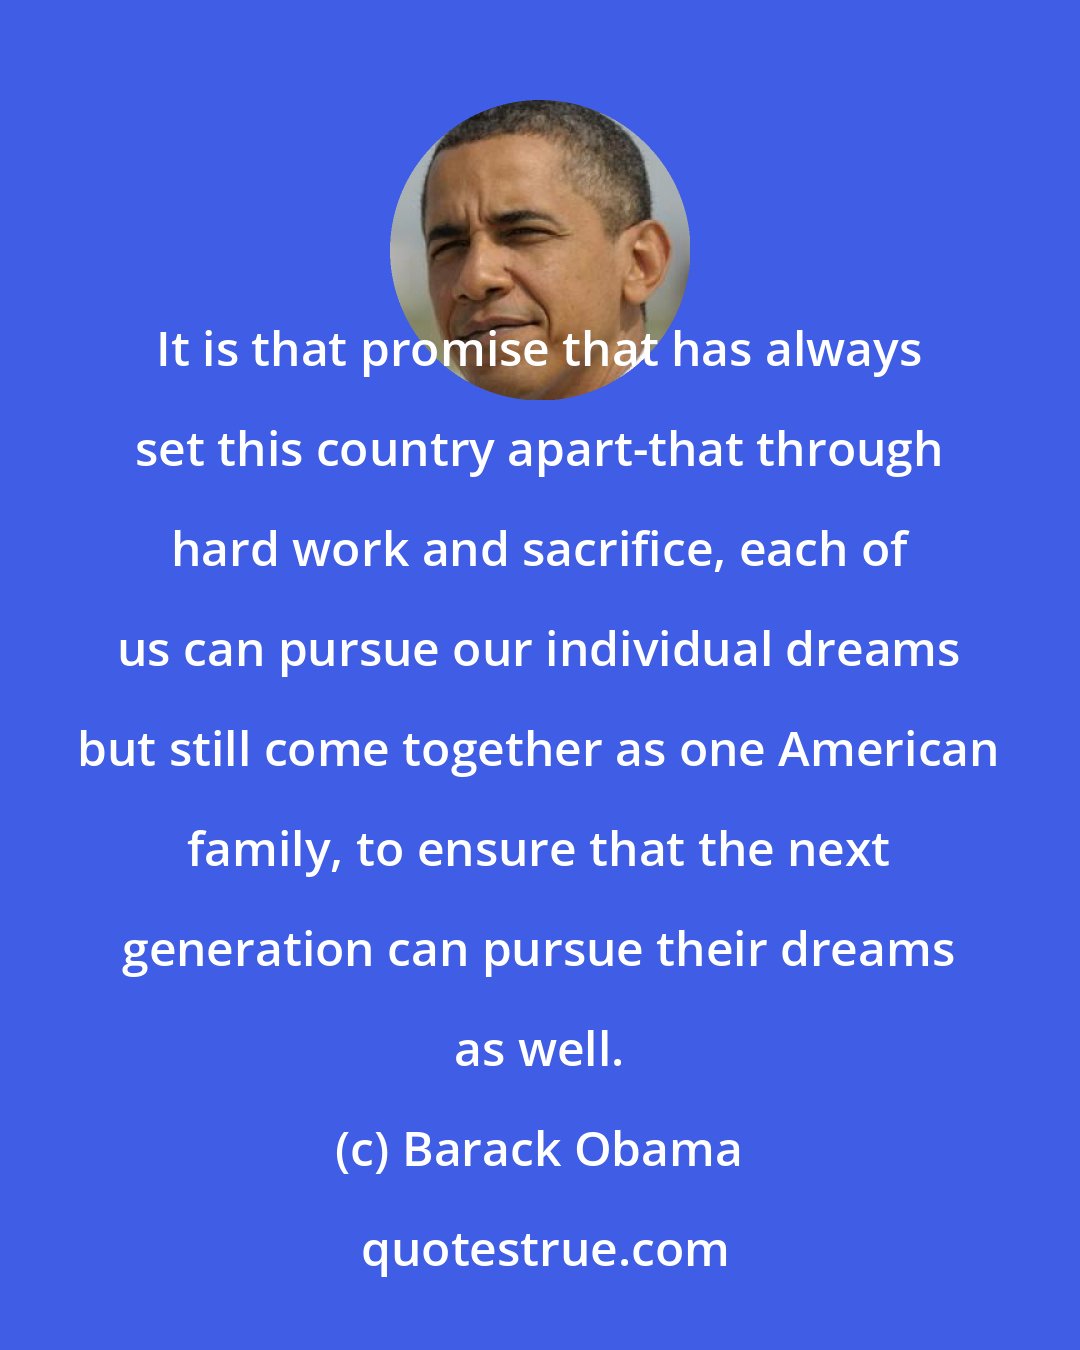 Barack Obama: It is that promise that has always set this country apart-that through hard work and sacrifice, each of us can pursue our individual dreams but still come together as one American family, to ensure that the next generation can pursue their dreams as well.